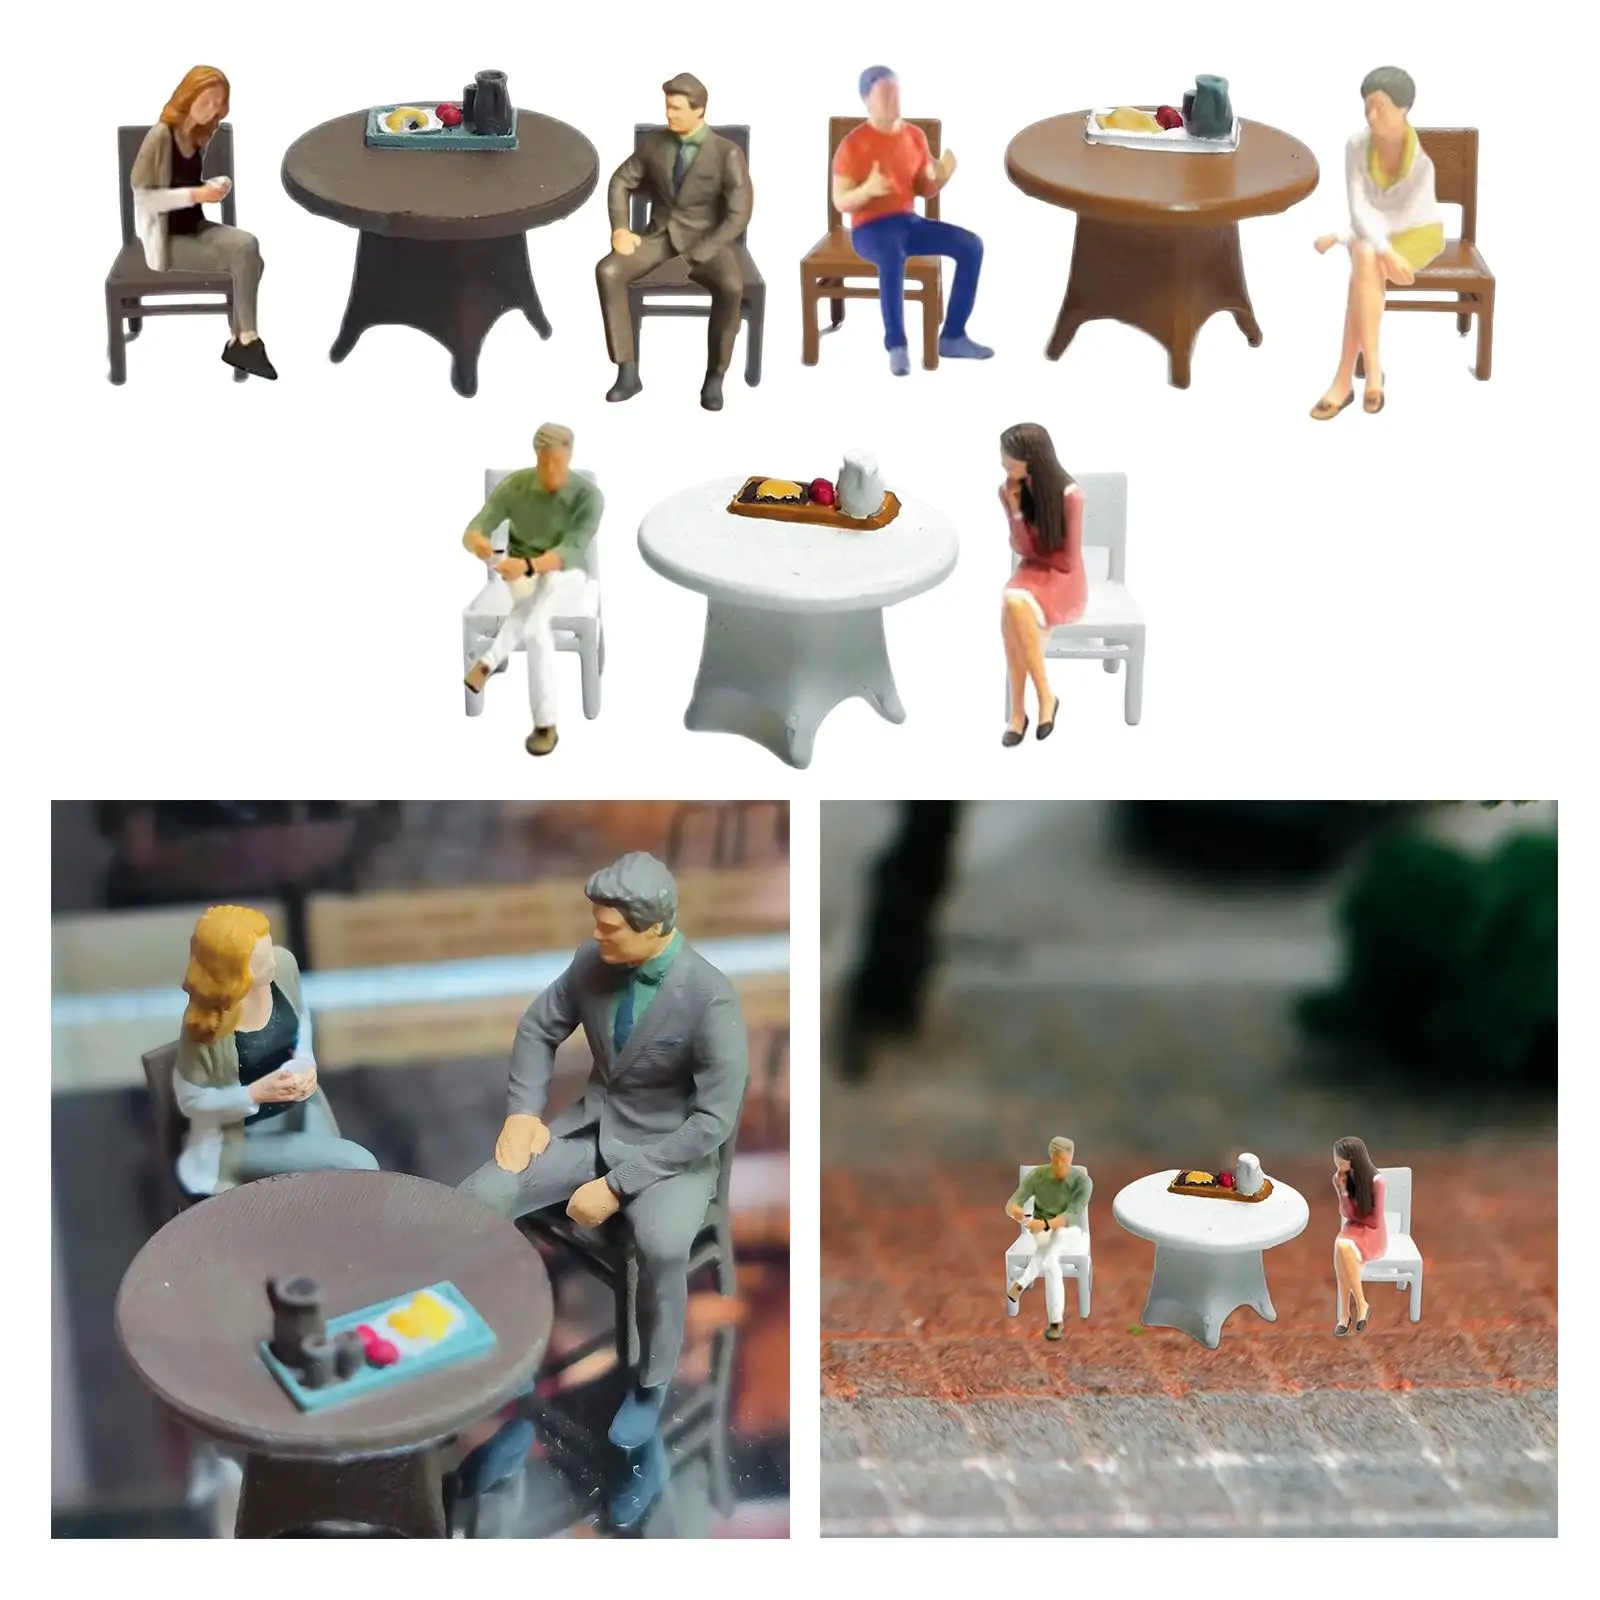 1/64 Action Figures Model Trains People Figures Tiny People Model People Figurines for Photography Props